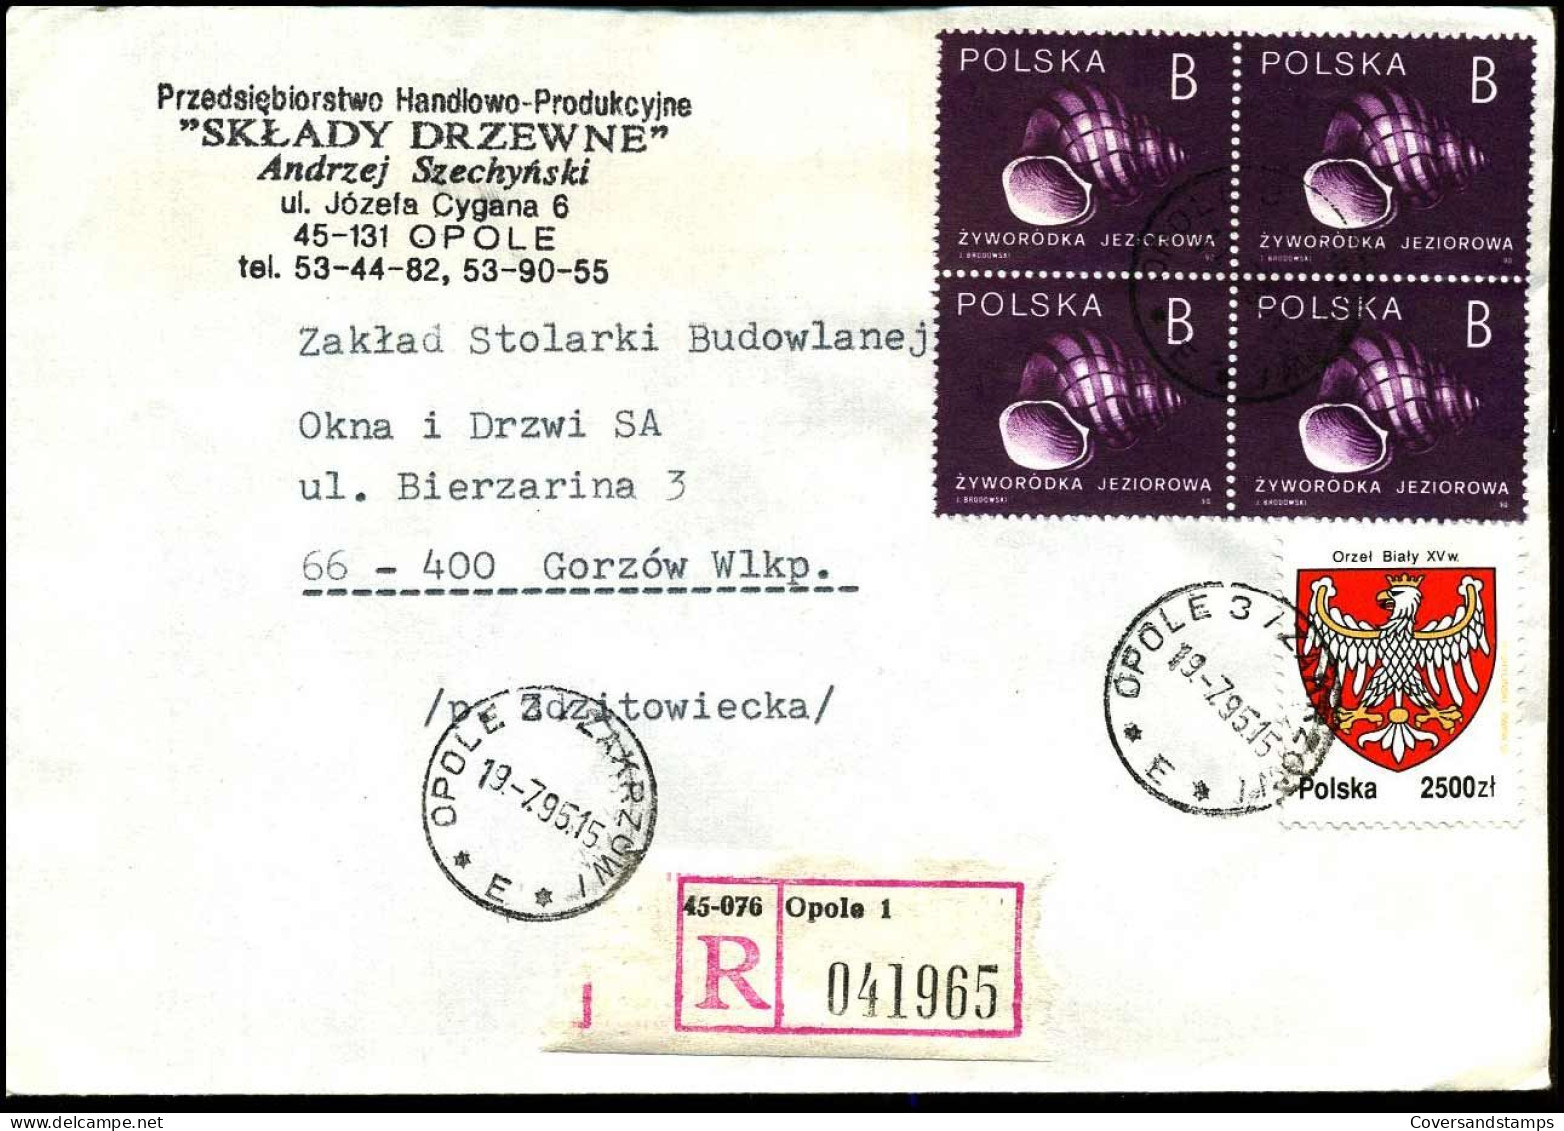 Registered Cover - "Sklady Drzewne" - Lettres & Documents